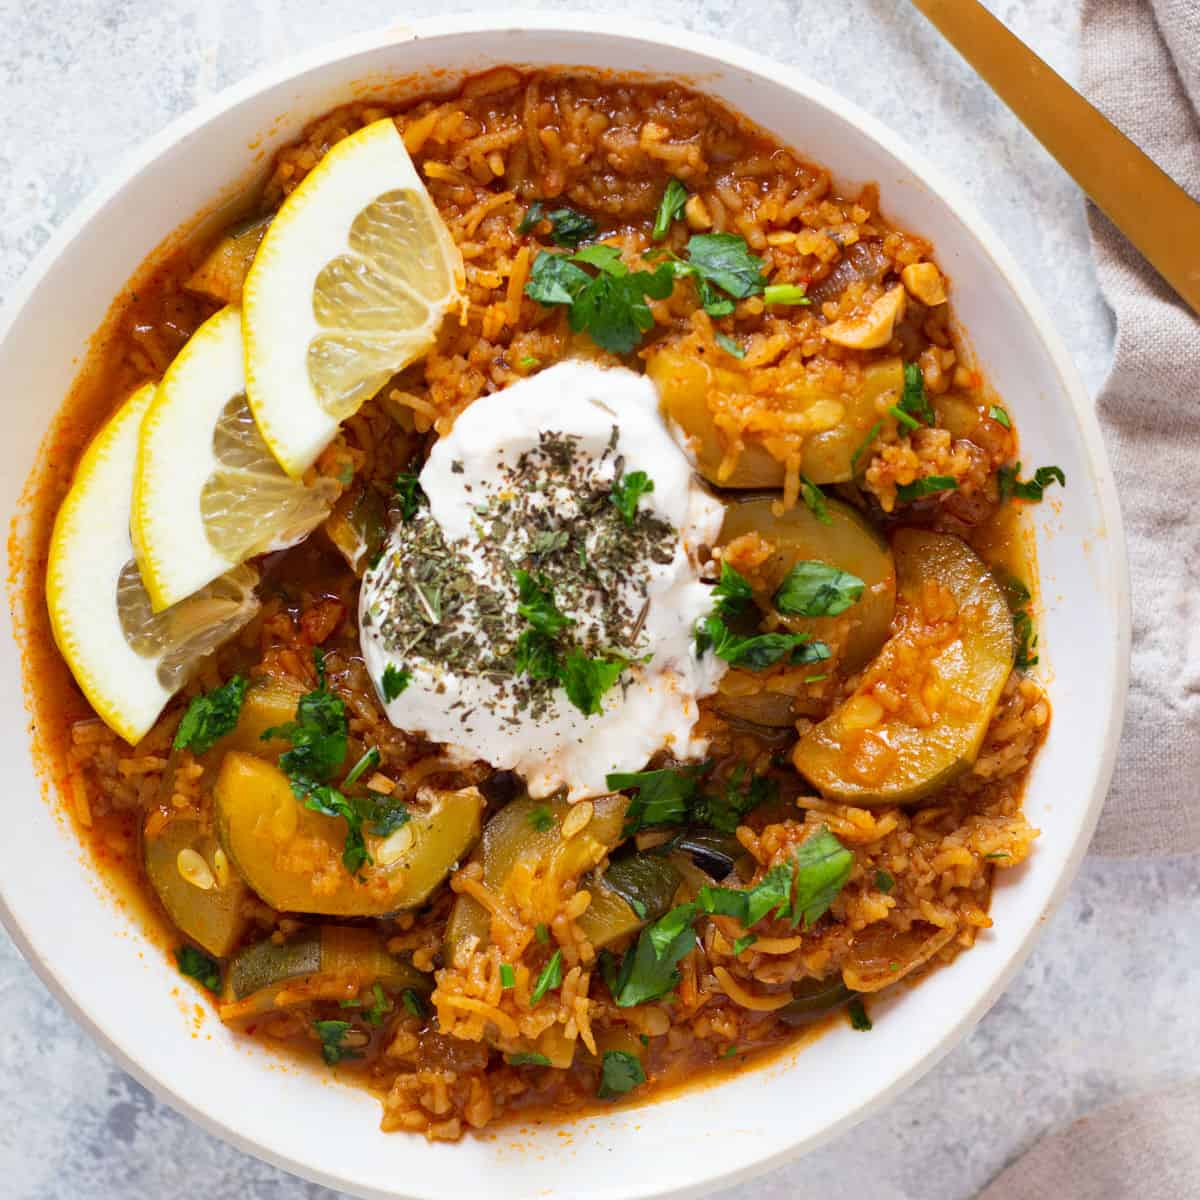 This Turkish zucchini stew is hearty, healthy and so easy to make. It's made in one pot and is ready in just 30 minutes.
